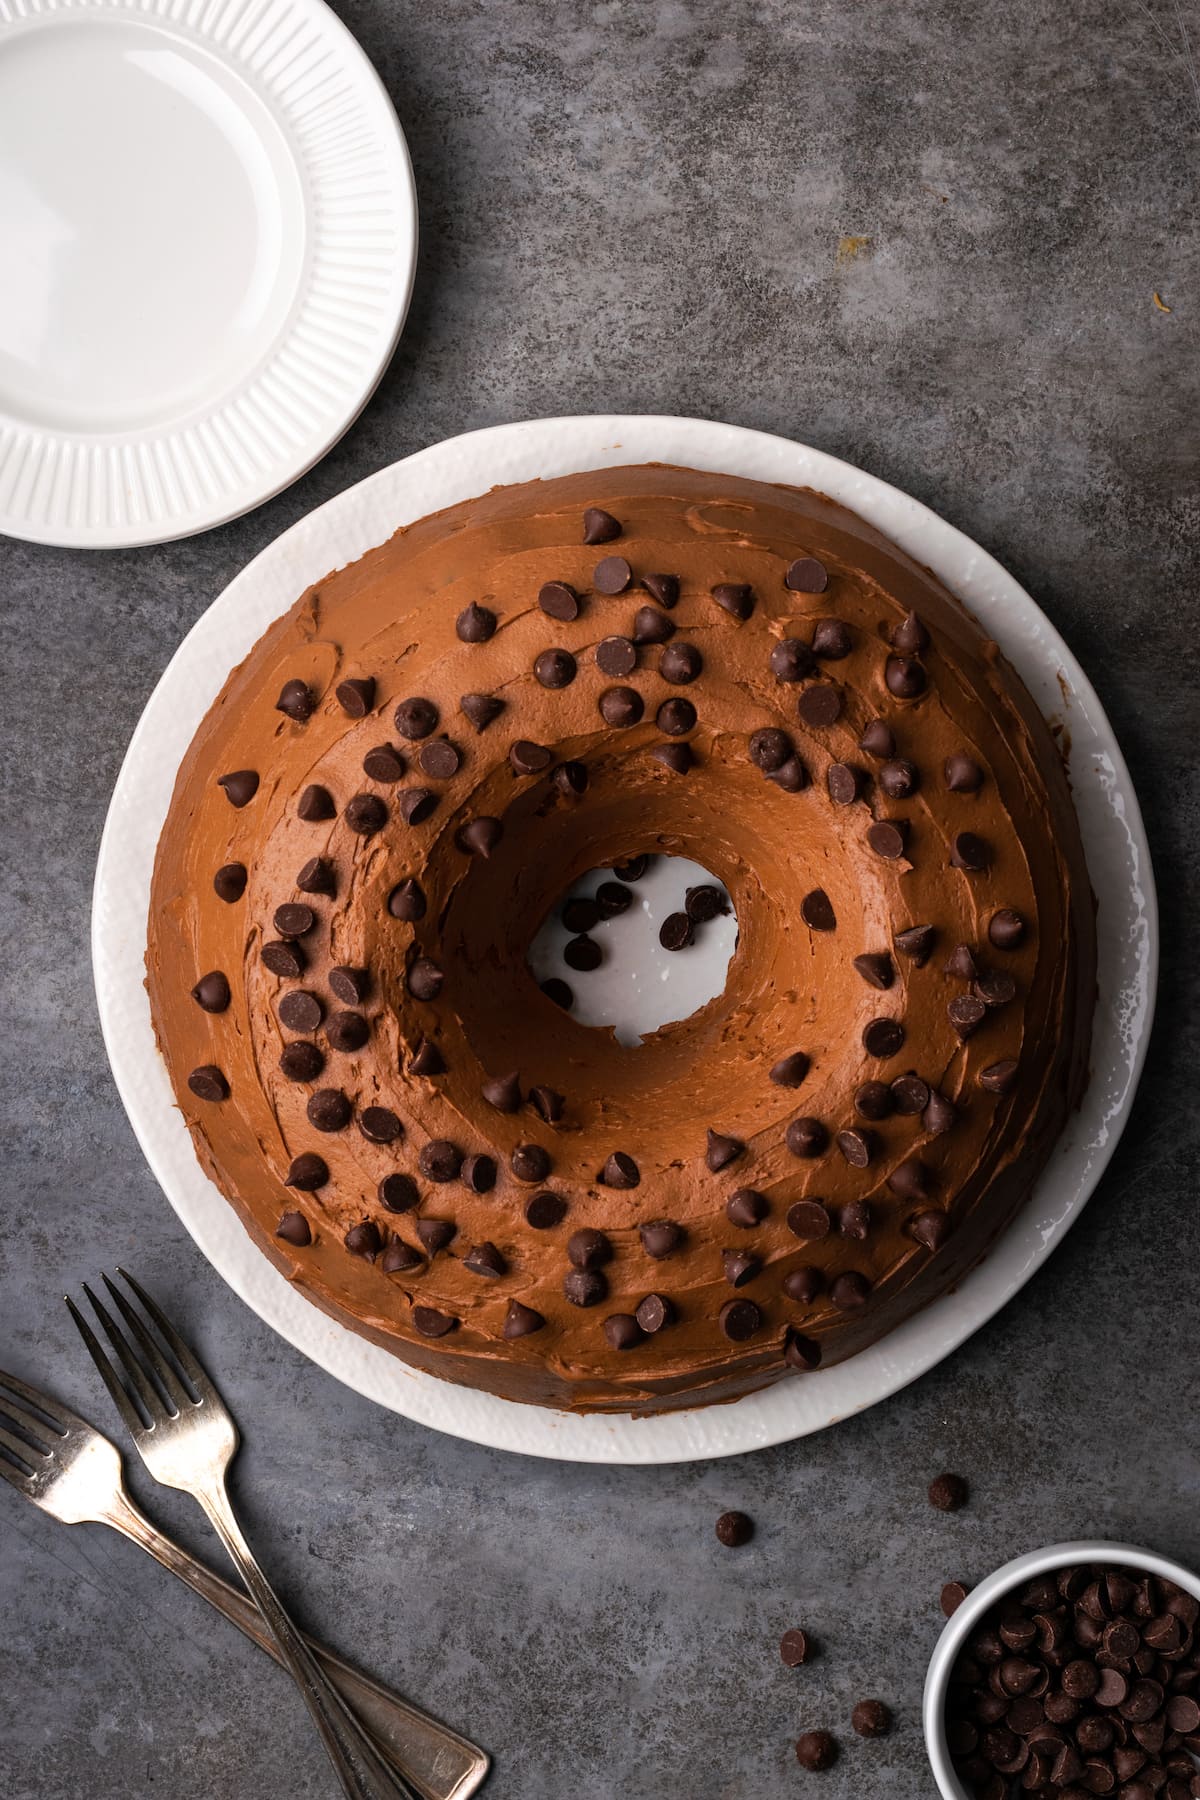 Overhead view of ridiculous chocolate bundt cake on a plate frosted with chocolate frosting and topped with chocolate chips.